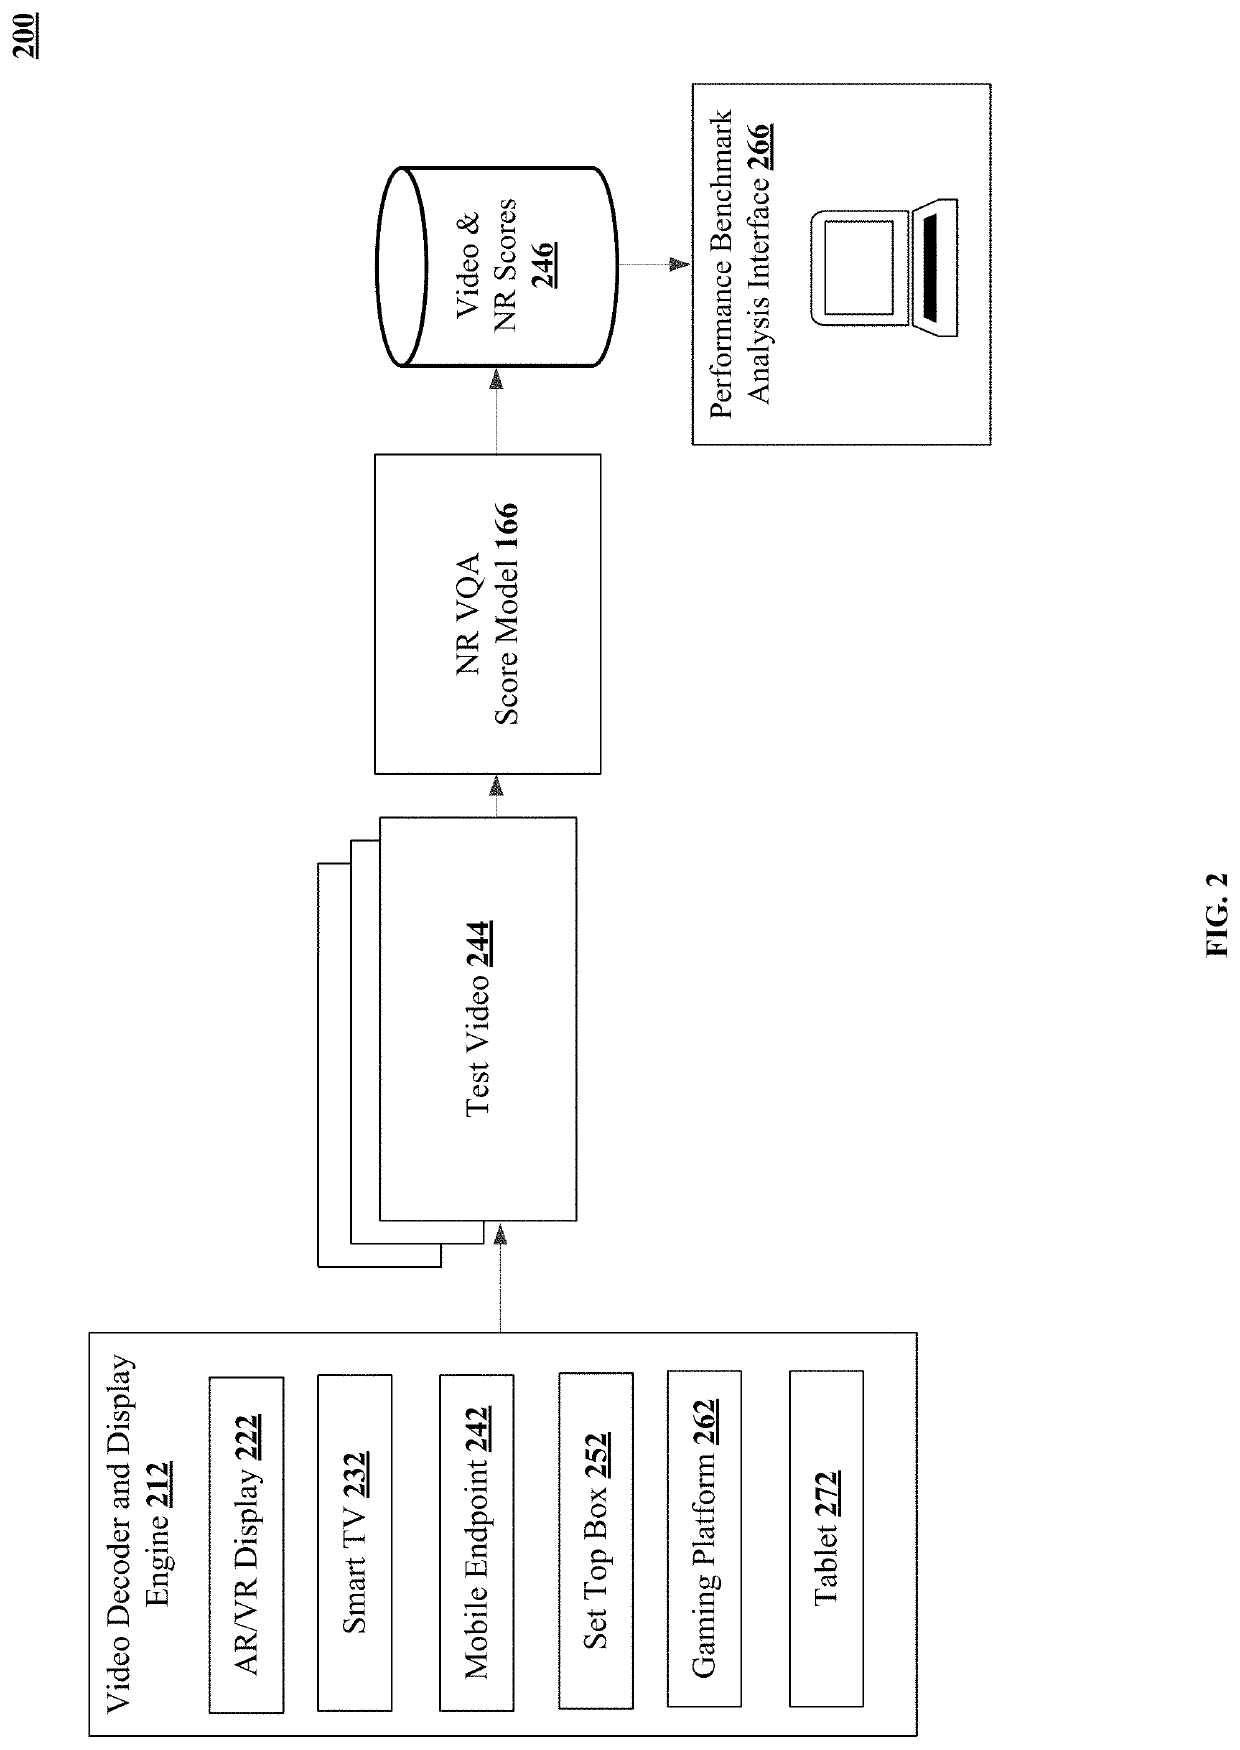 Training an encrypted video stream network scoring system with non-reference video scores